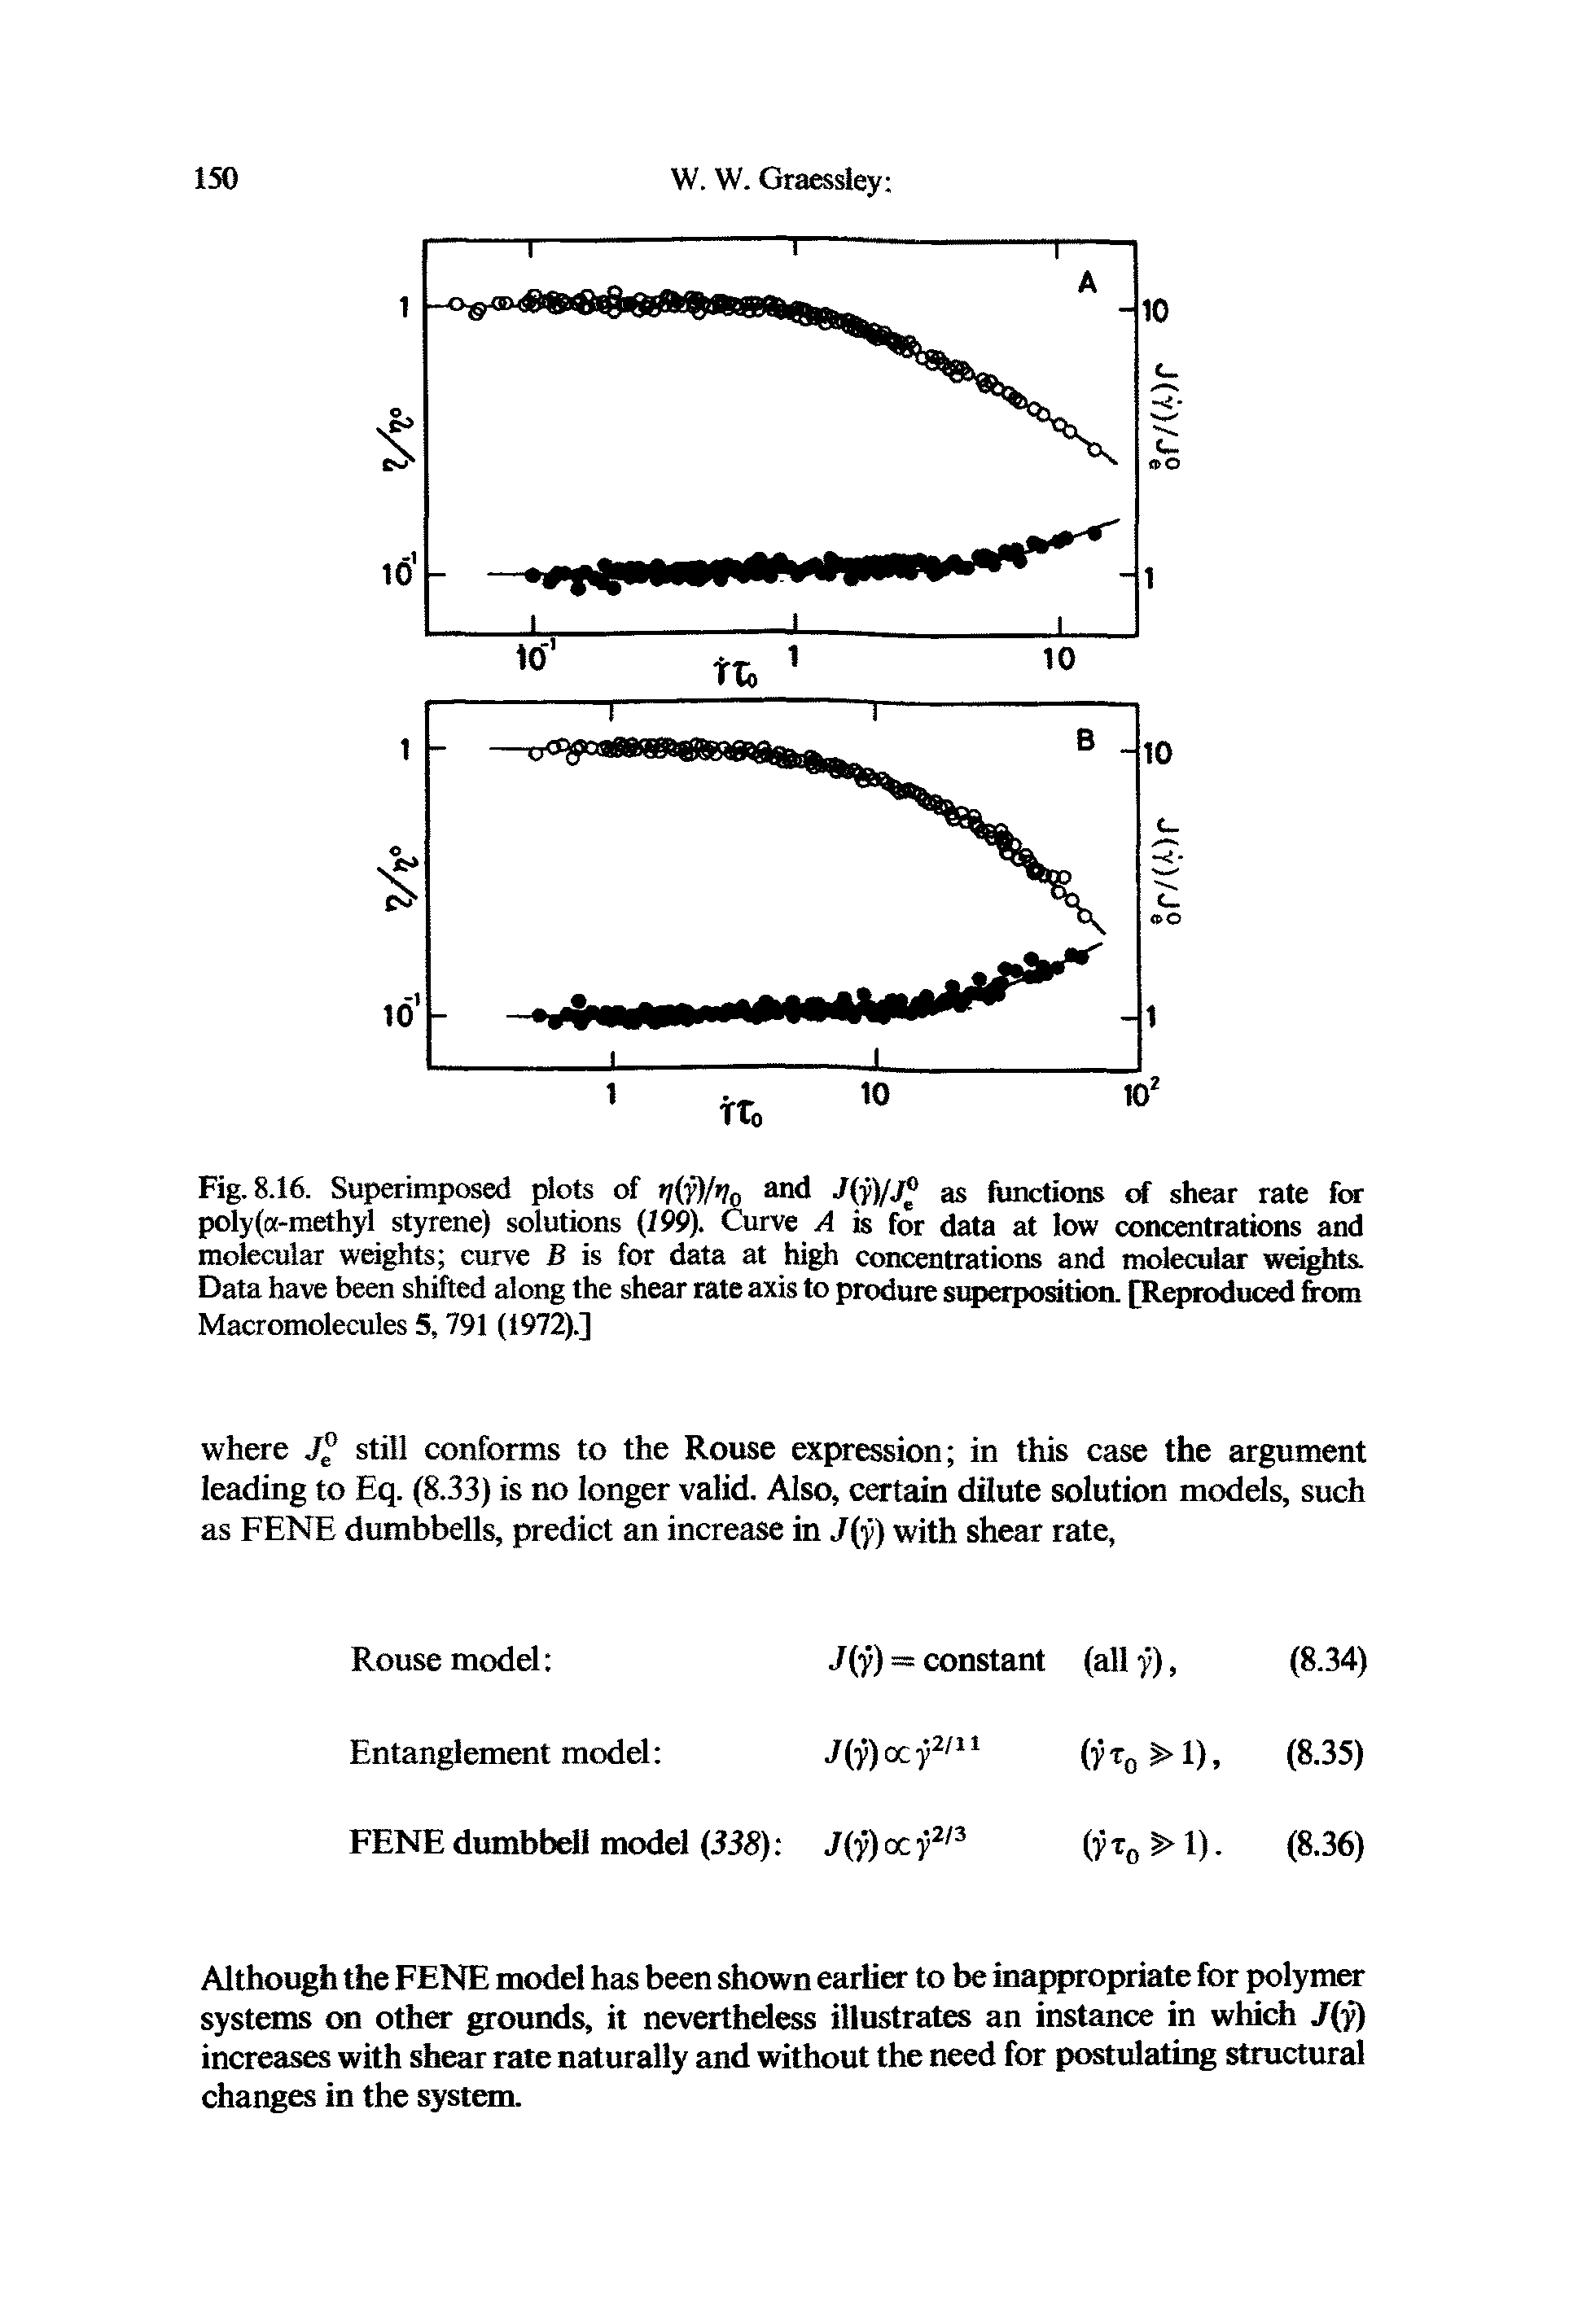 Fig. 8.16. Superimposed plots of y(y)M0 and J(y)/J° as functions of shear rate for poly( -methyl styrene) solutions (199). Curve A is for data at low concentrations and molecular weights curve B is for data at high concentrations and molecular weights. Data have been shifted along the shear rate axis to produre superposition. [Reproduced from Macromolecules 5,791 (1972).]...